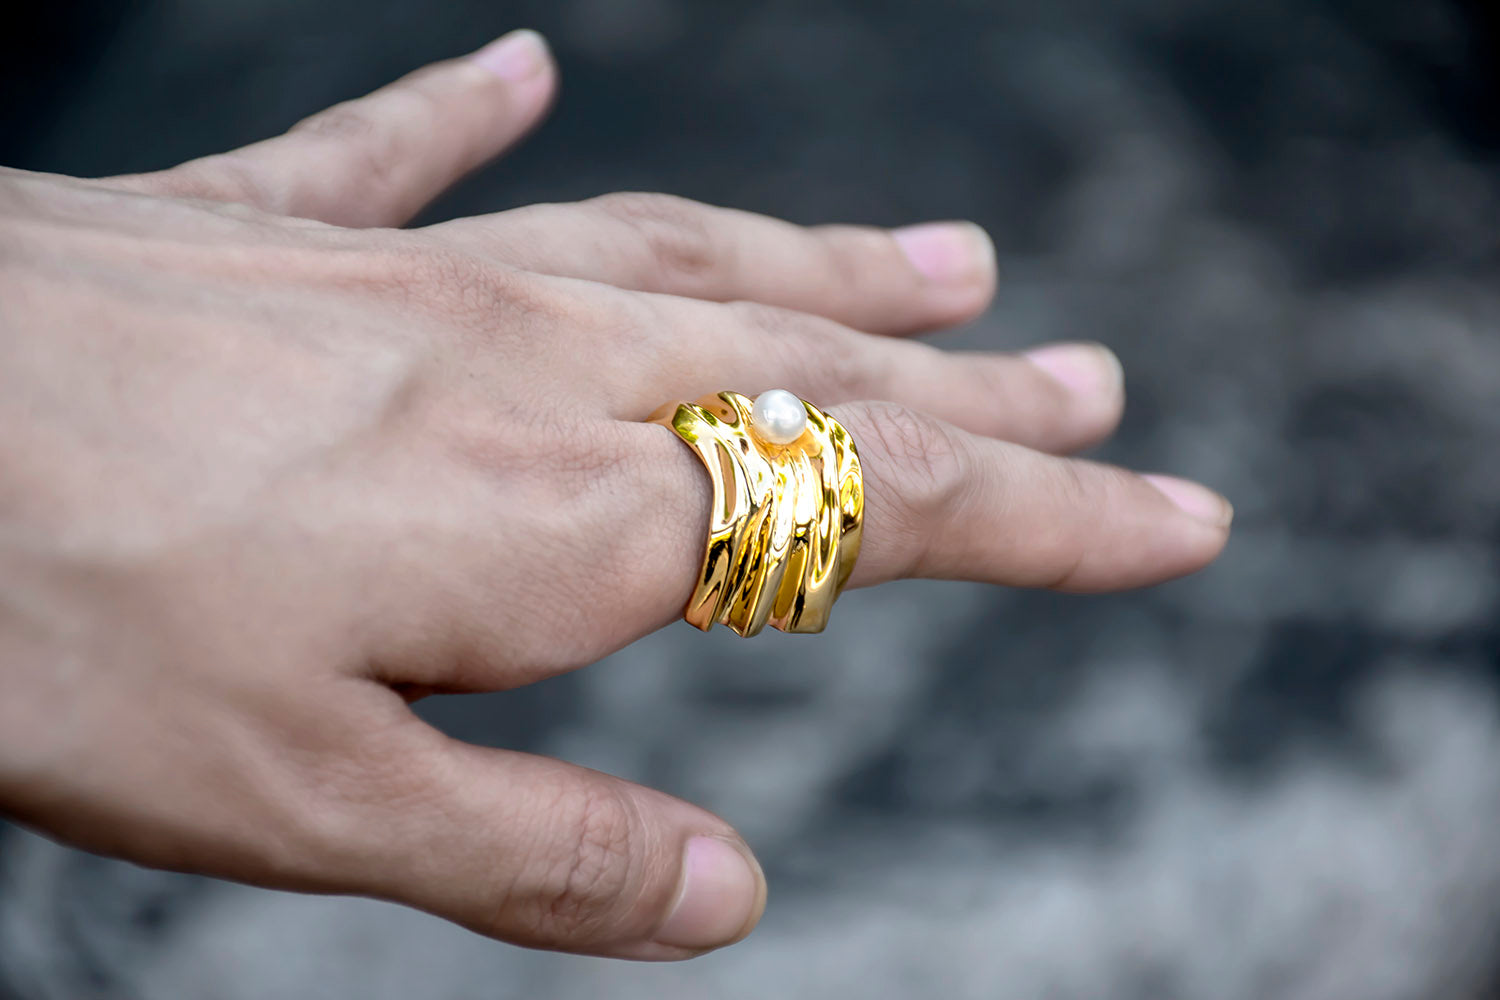 Cambré Ring Plated in 18K Gold